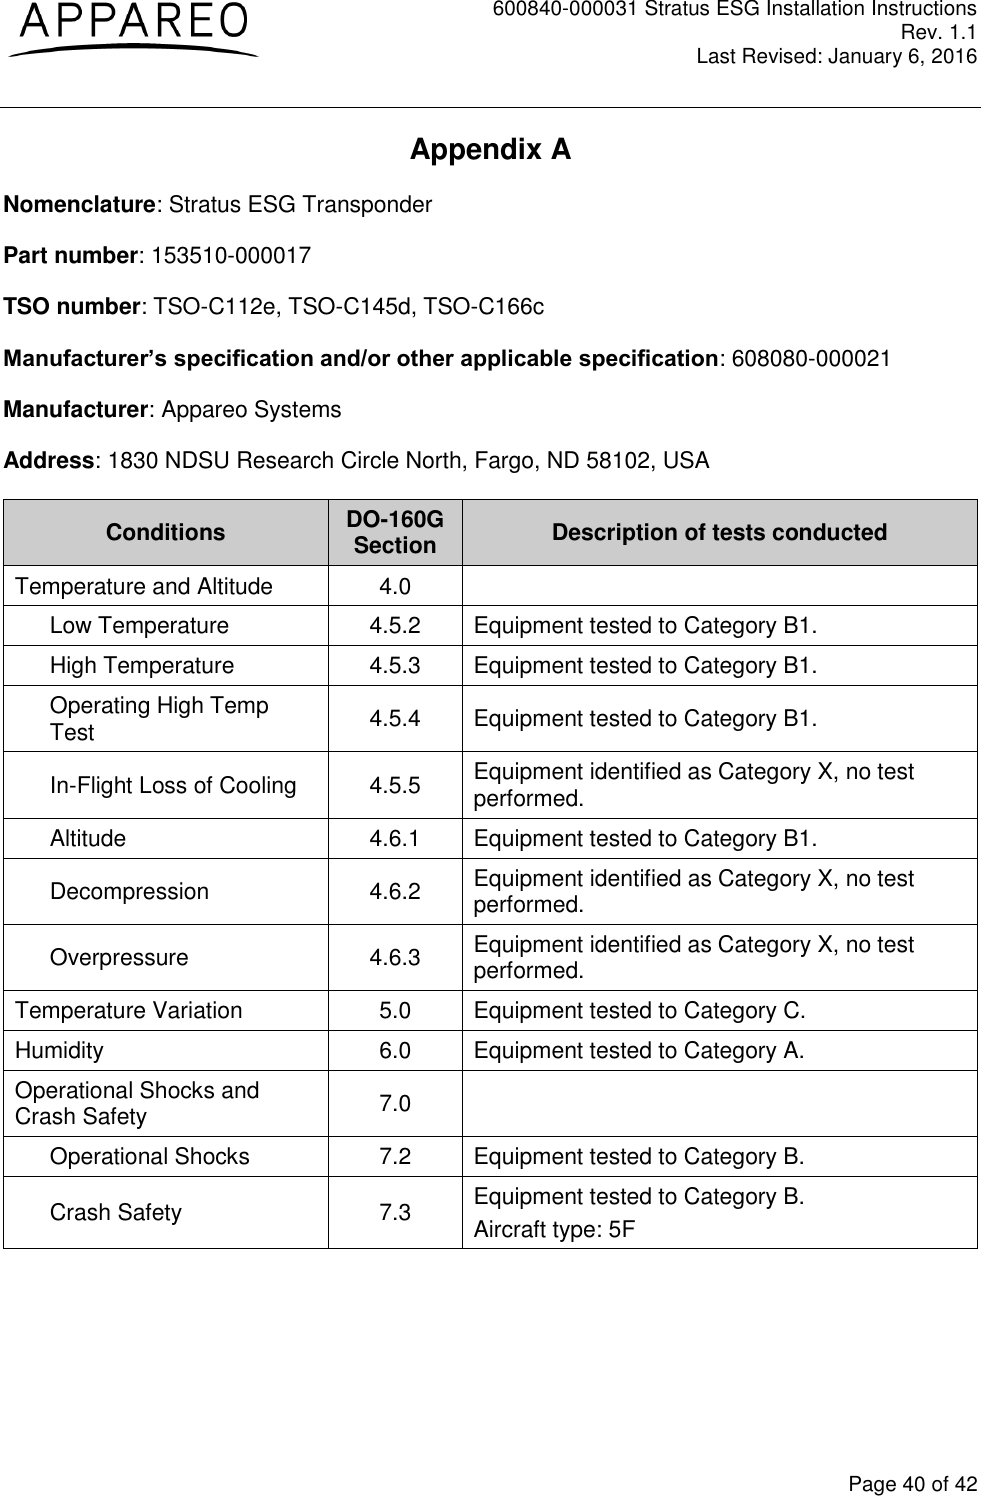 600840-000031 Stratus ESG Installation Instructions Rev. 1.1 Last Revised: January 6, 2016  Page 40 of 42 Appendix A Nomenclature: Stratus ESG Transponder Part number: 153510-000017 TSO number: TSO-C112e, TSO-C145d, TSO-C166c Manufacturer’s specification and/or other applicable specification: 608080-000021 Manufacturer: Appareo Systems Address: 1830 NDSU Research Circle North, Fargo, ND 58102, USA Conditions DO-160G Section Description of tests conducted Temperature and Altitude 4.0  Low Temperature 4.5.2 Equipment tested to Category B1. High Temperature 4.5.3 Equipment tested to Category B1. Operating High Temp Test 4.5.4 Equipment tested to Category B1. In-Flight Loss of Cooling 4.5.5 Equipment identified as Category X, no test performed. Altitude 4.6.1 Equipment tested to Category B1. Decompression 4.6.2 Equipment identified as Category X, no test performed. Overpressure 4.6.3 Equipment identified as Category X, no test performed. Temperature Variation 5.0 Equipment tested to Category C. Humidity 6.0 Equipment tested to Category A. Operational Shocks and Crash Safety 7.0  Operational Shocks 7.2 Equipment tested to Category B. Crash Safety 7.3 Equipment tested to Category B. Aircraft type: 5F 